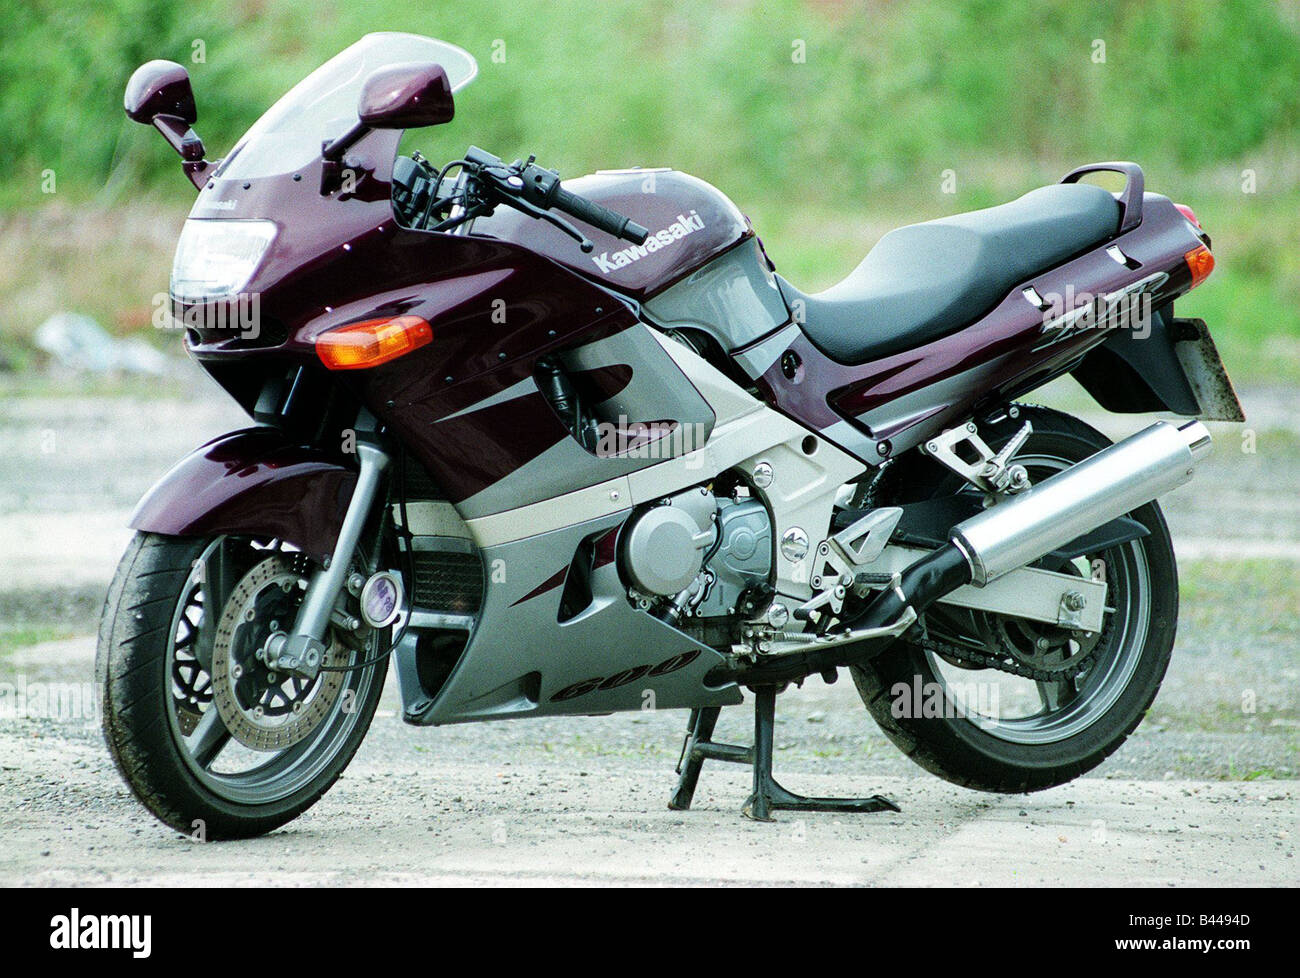 Gooey Glatte bred Kawasaki 600 ZZR motorcycle road record June 1998 motoring supplement  purple and silver motorcycle motorbike Stock Photo - Alamy